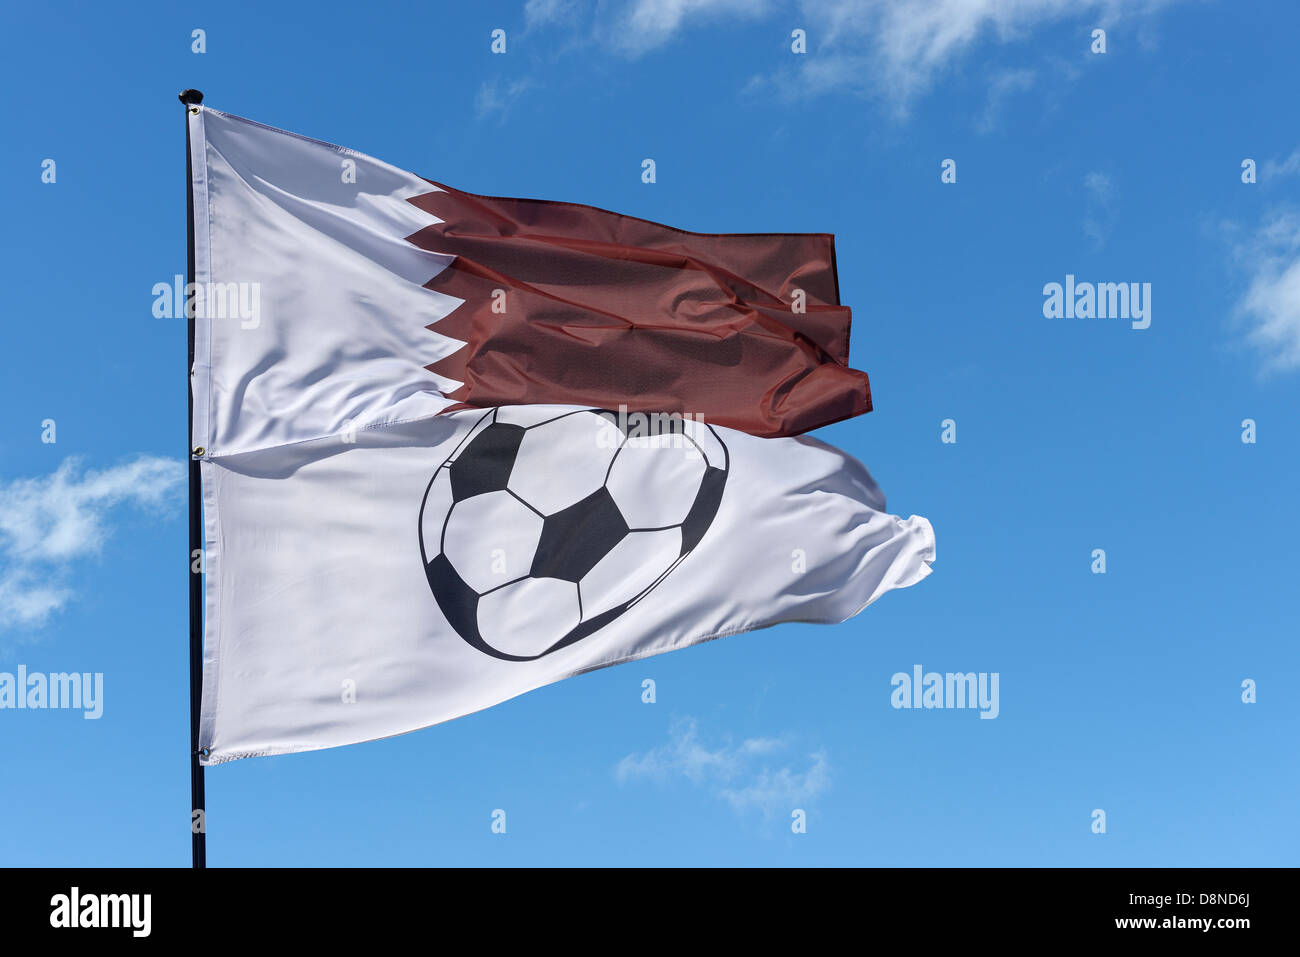 State of Qatar national flag and a football flag Stock Photo